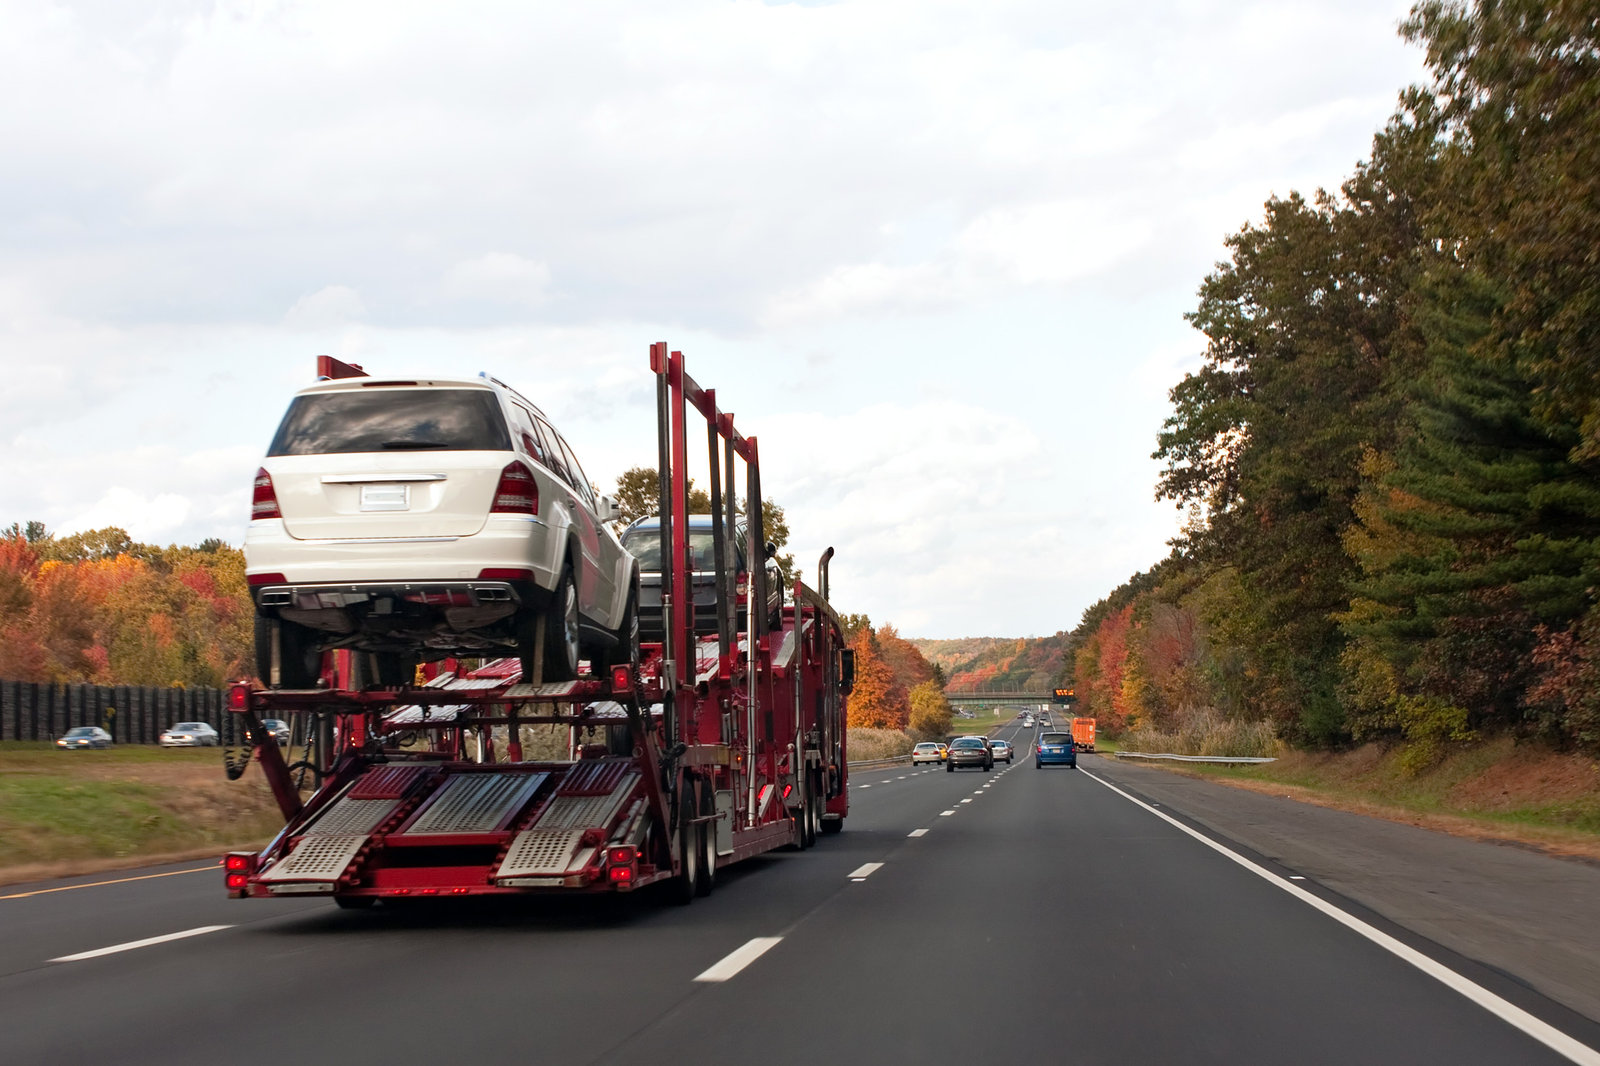 An open car carrier on the road.